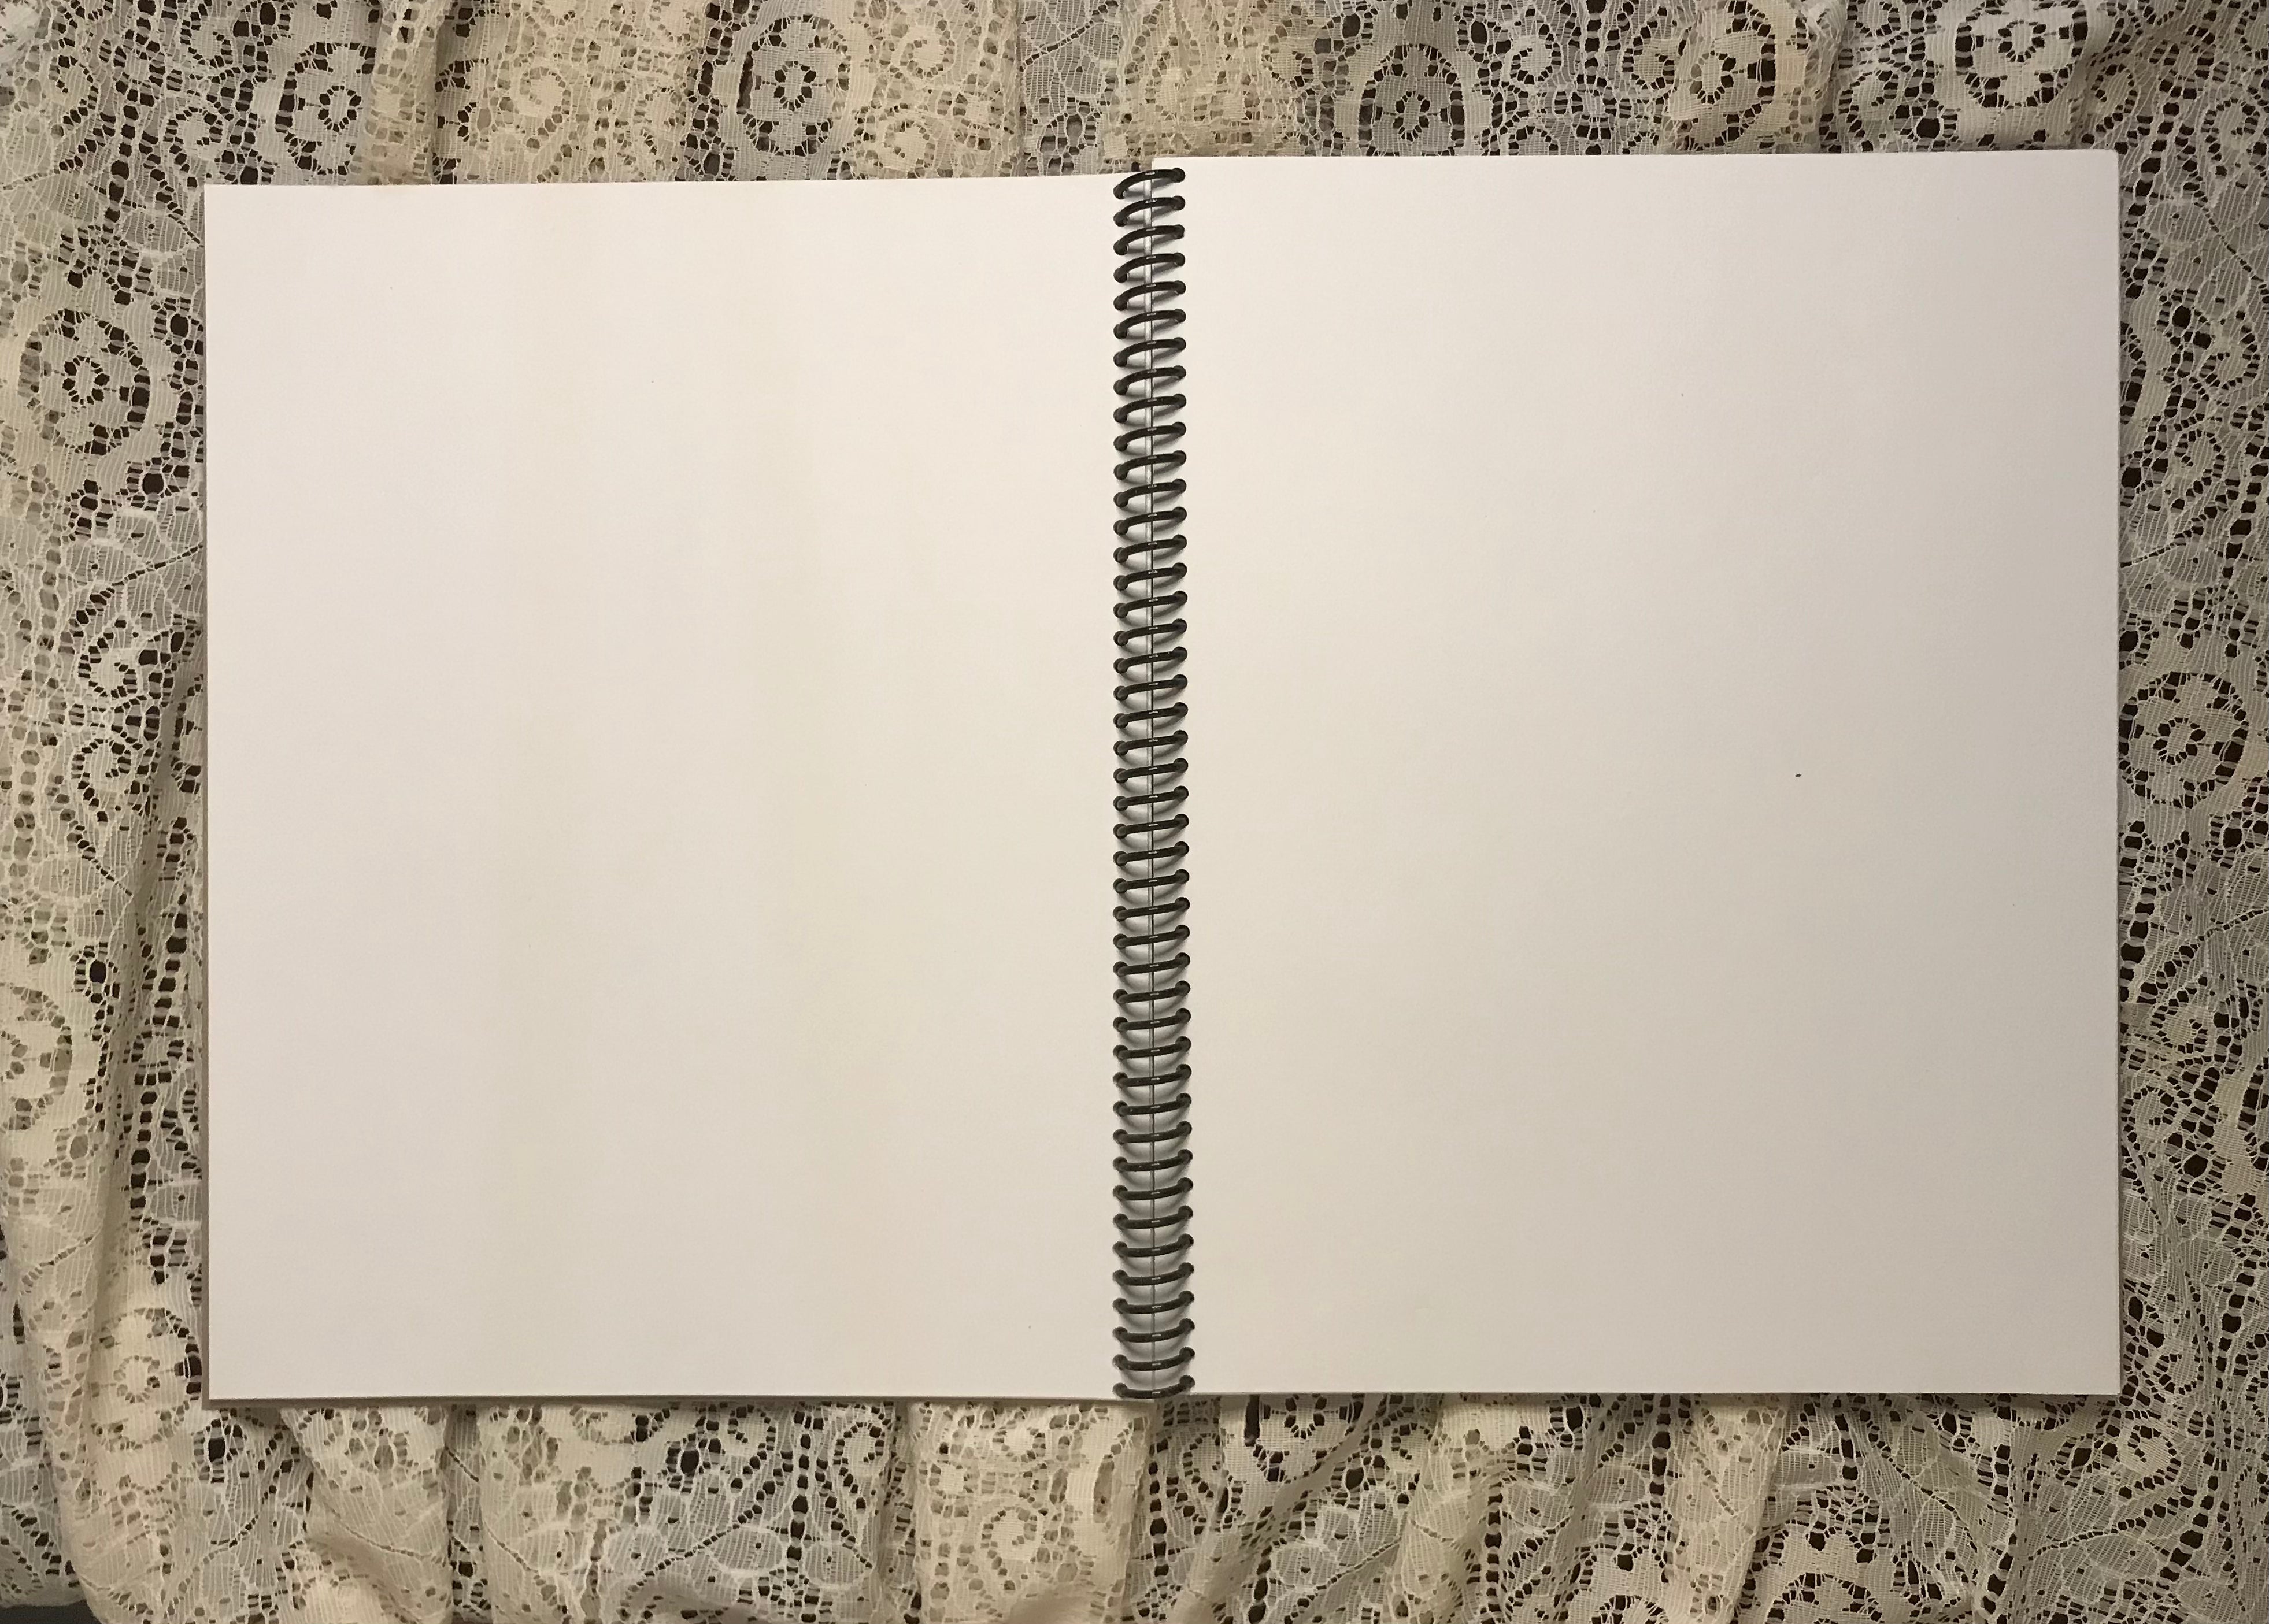 Alan Parsons Project Album Cover Notebook